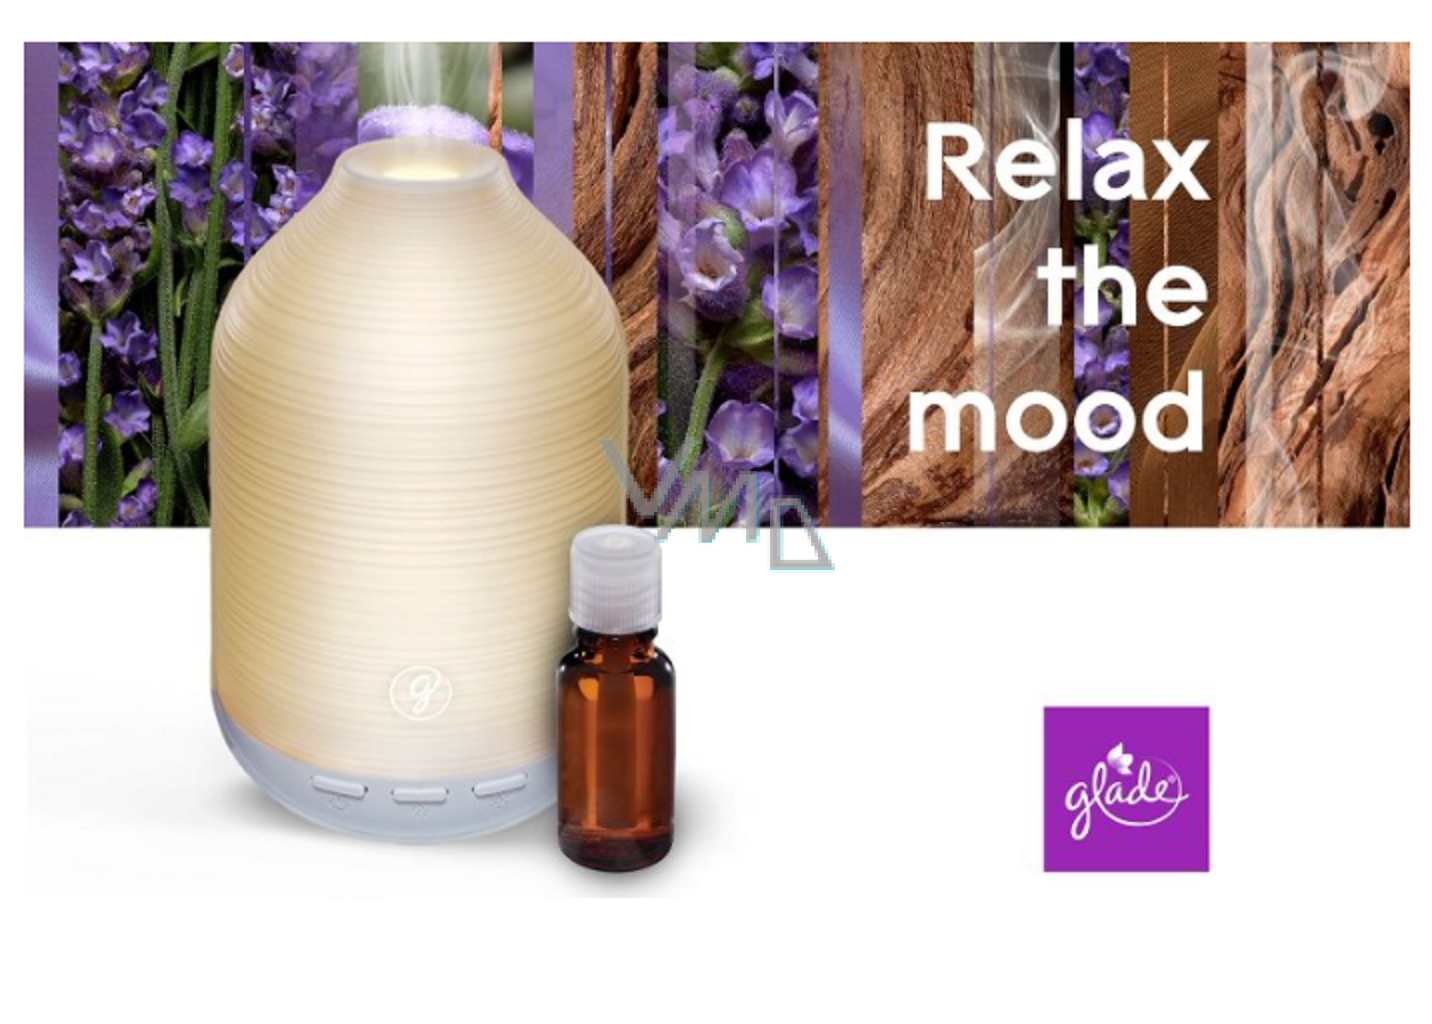 Glade Aromatherapy Cool Mist Diffuser Moment of Zen Lavender +